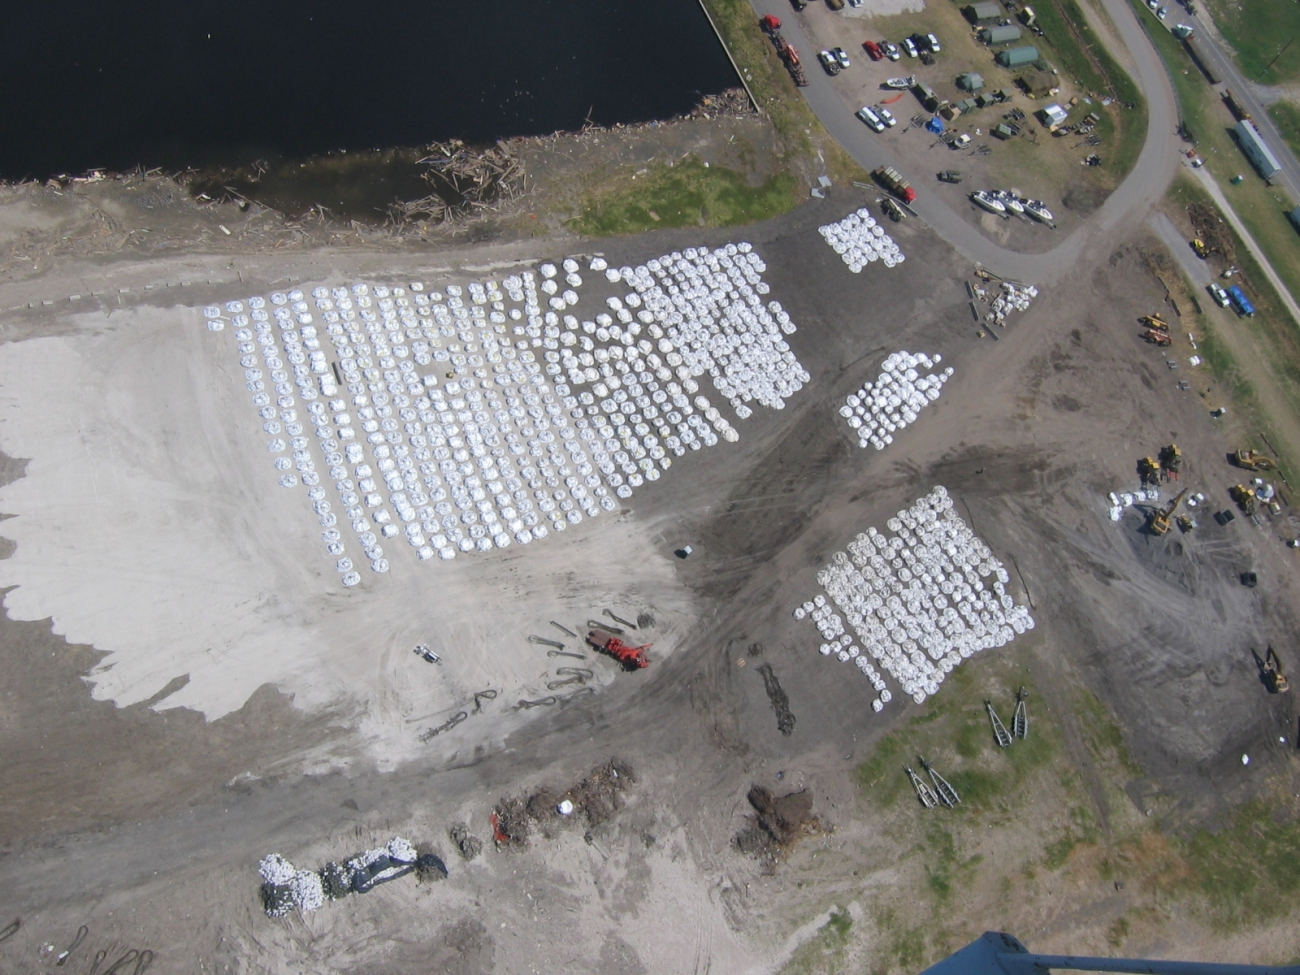 Sand bags prepared for plugging leaks in the dikes surrounding New Orleans